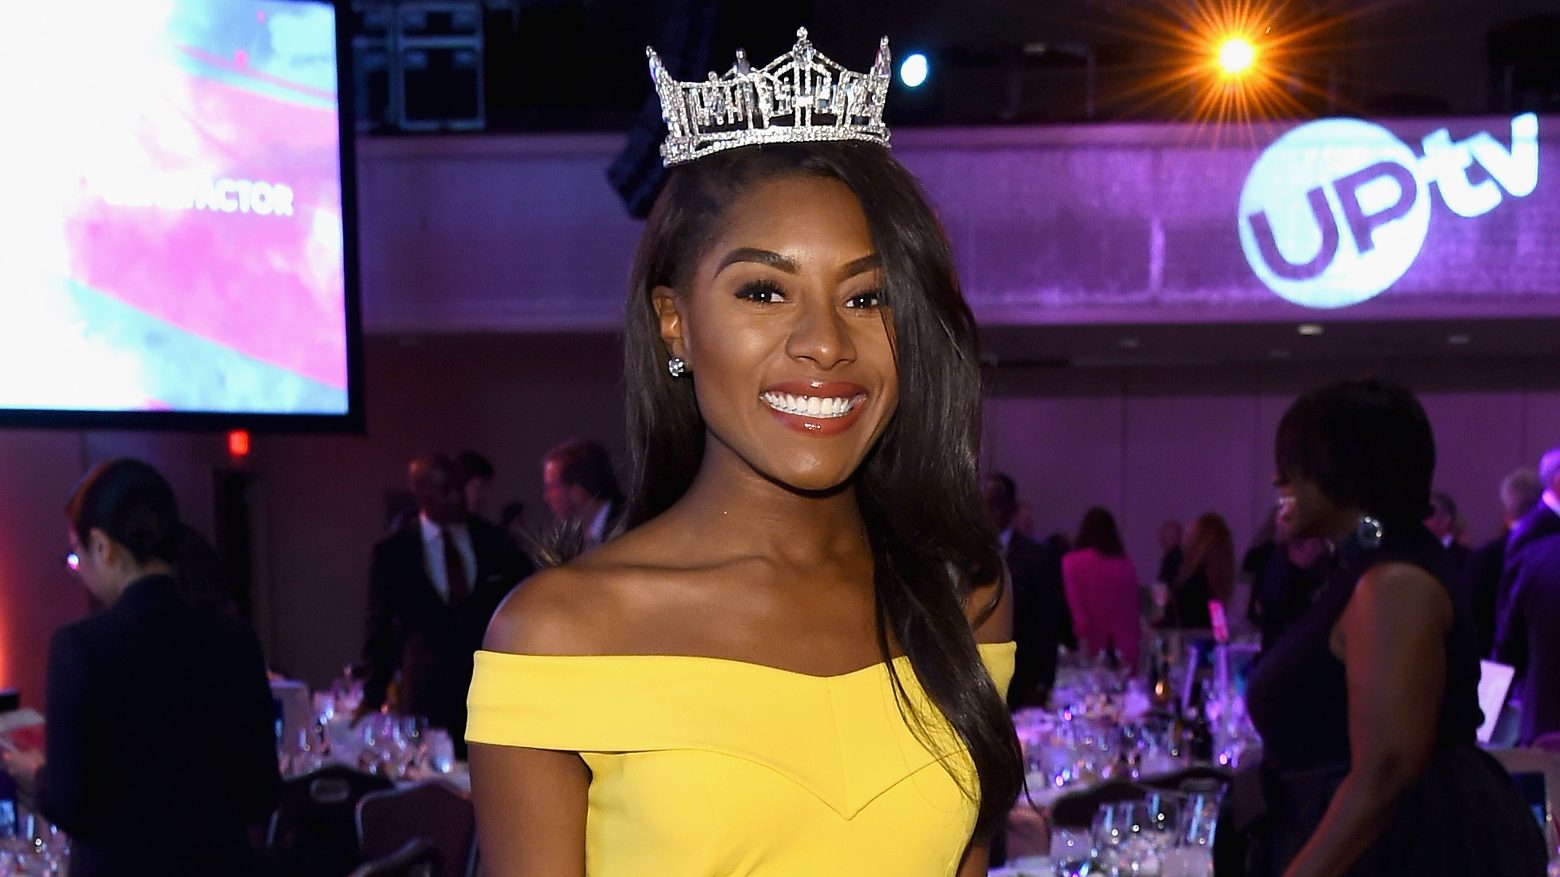 How to Watch Miss America 2020 Online Without Cable